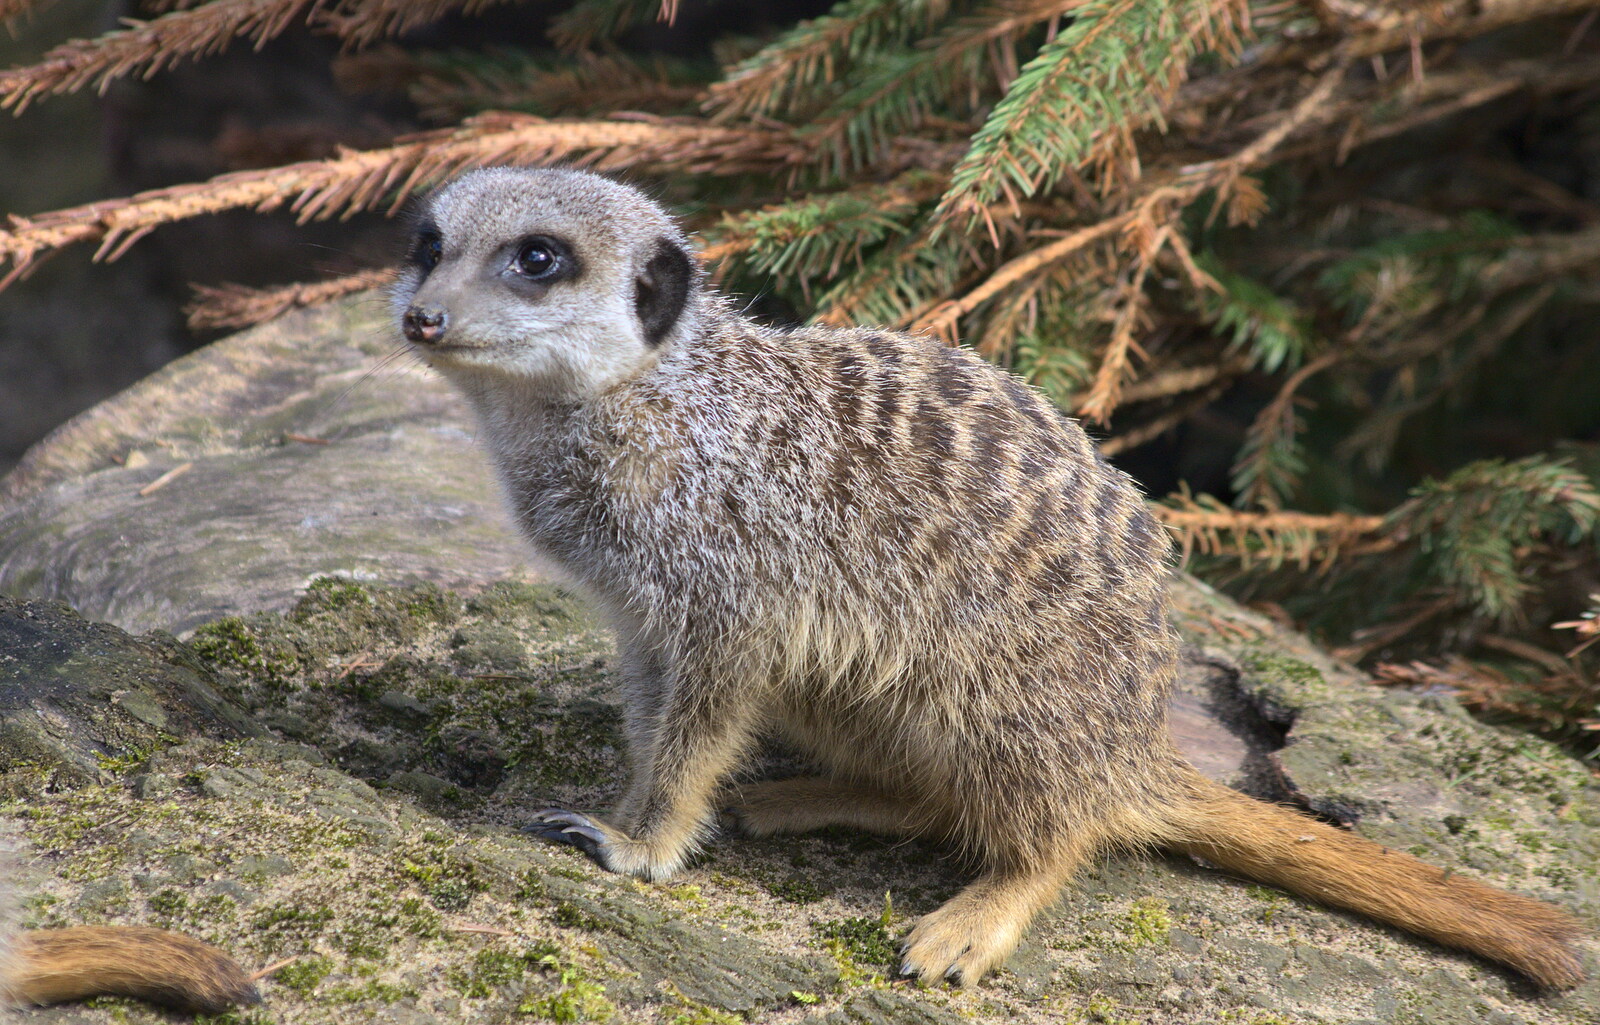 Another meerkat from Another Trip to Banham Zoo, Banham, Norfolk - 25th March 2016